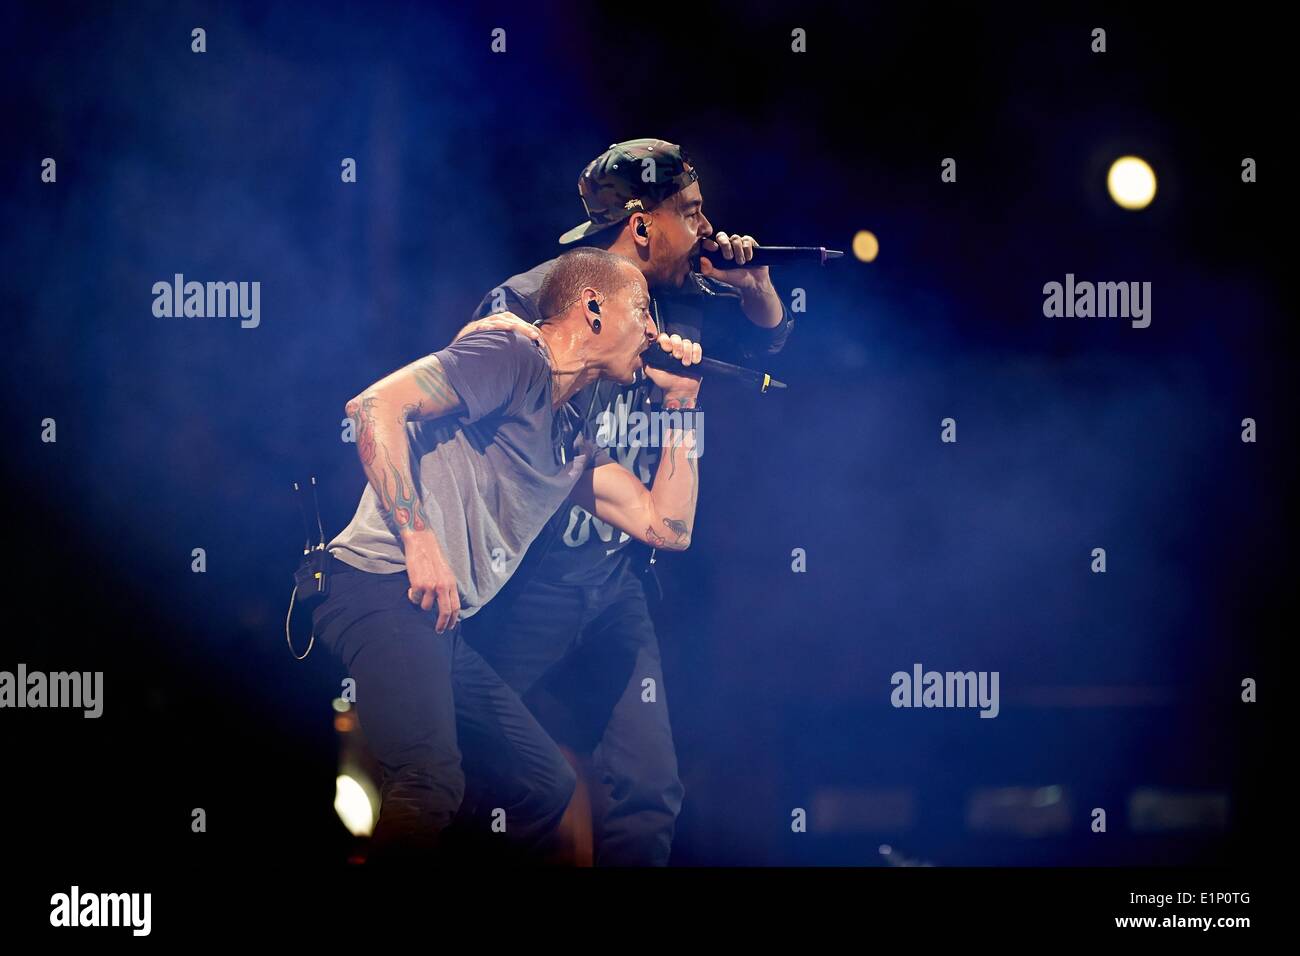 Nuerburg, Germany. 07th June, 2014. Frontman of the US american crossover band Linkin Park Chester Bennington (L) and Mike Shinoda perform at the rock music festival 'Rock am Ring' at Nuerburgring motorsports complex in Nuerburg, Germany, 07 June 2014. 'Rock am Ring' takes place for 29th and last time. Photo: Thomas Frey/dpa/Alamy Live News Stock Photo